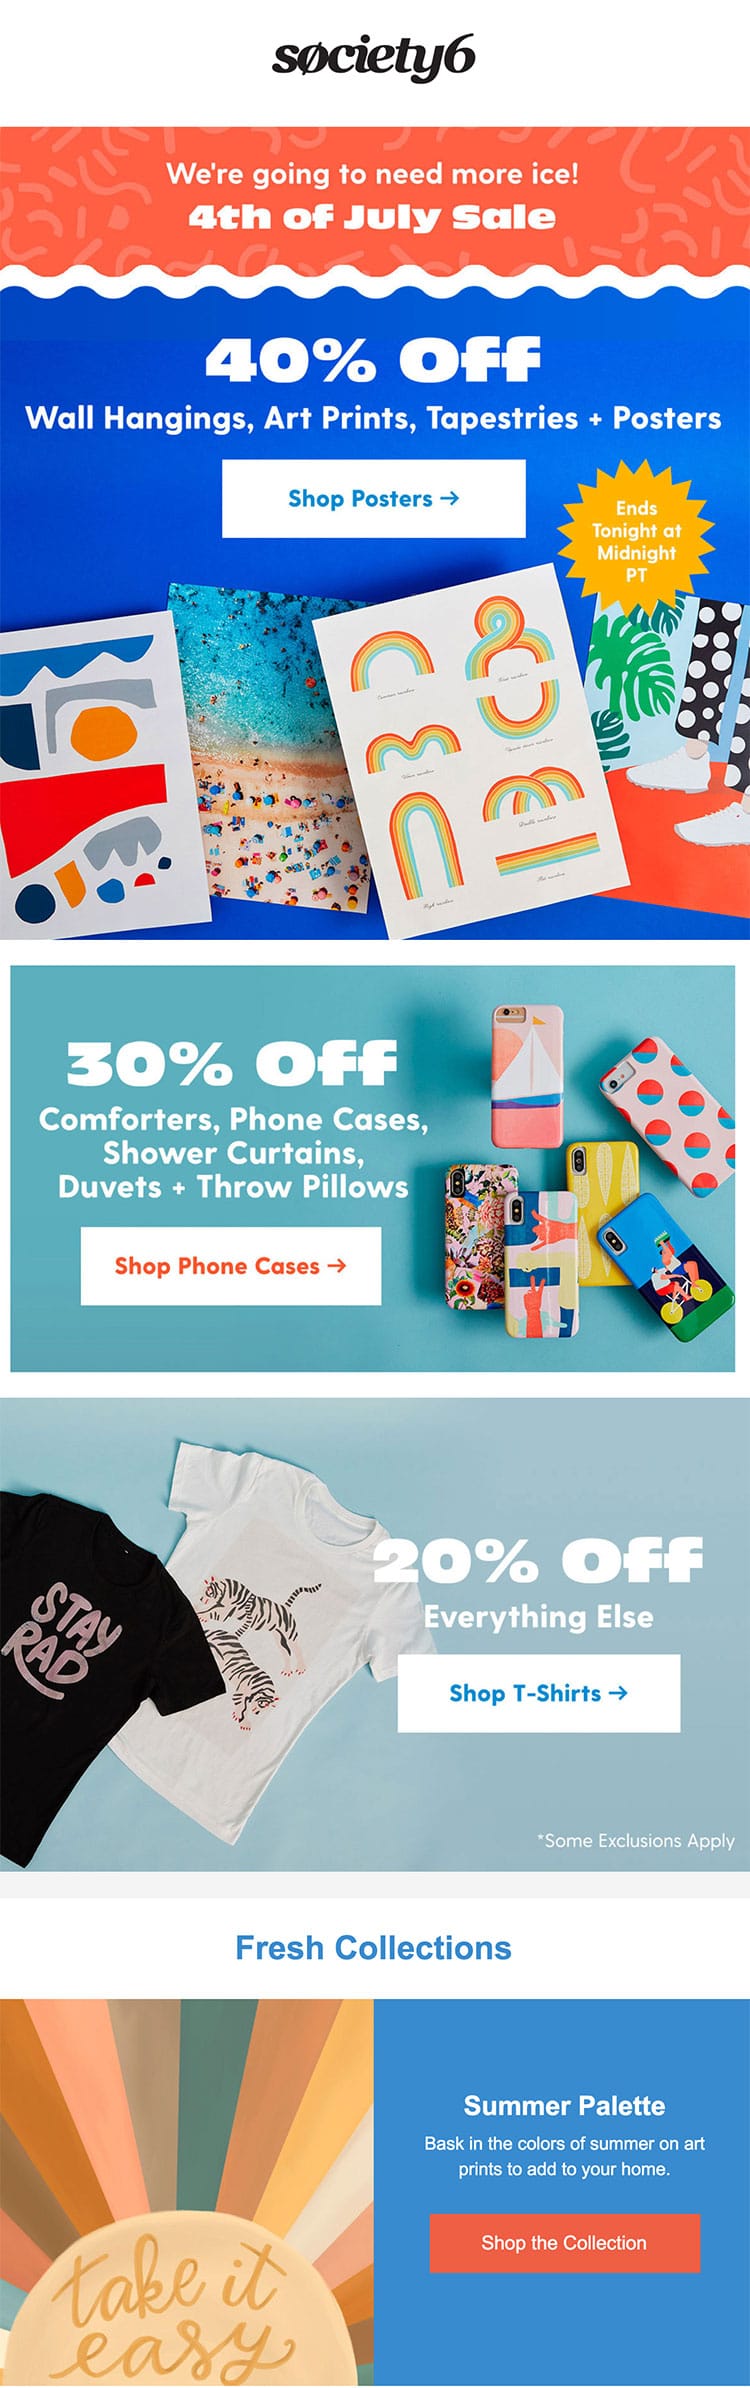 Consider this email from Society6 that mentions a number of holidays and events.